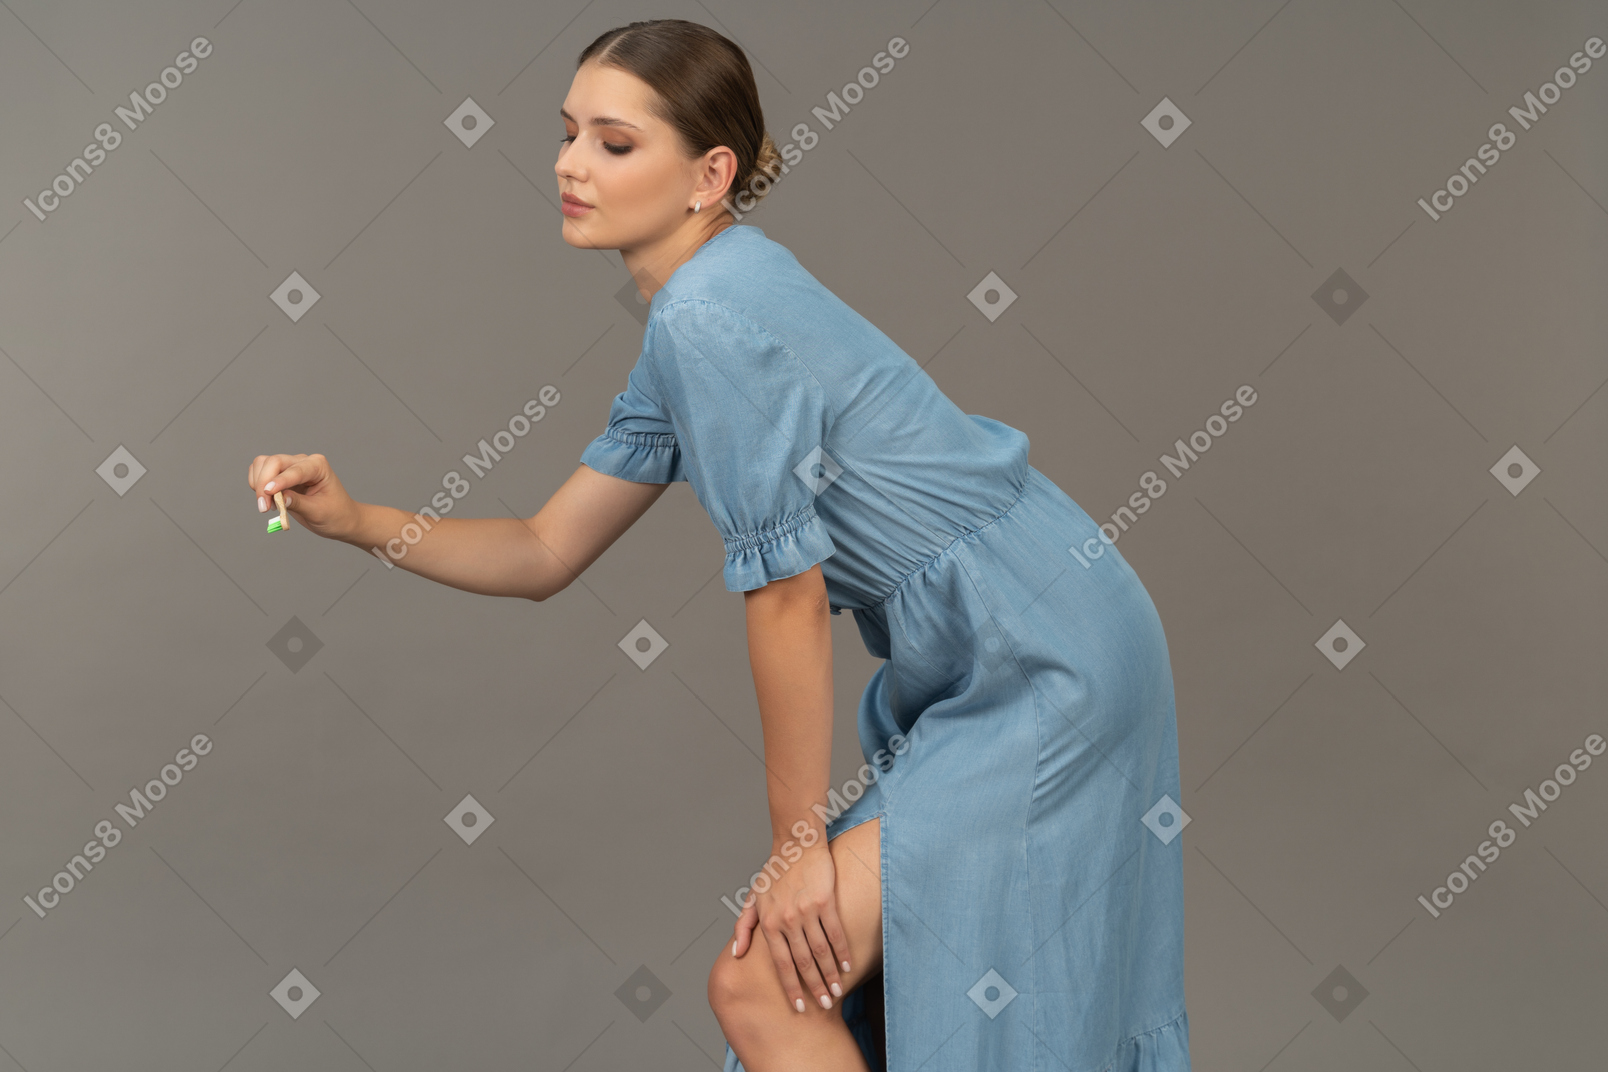 Side view of a young woman in blue dress holding toothbrush & leaning forward